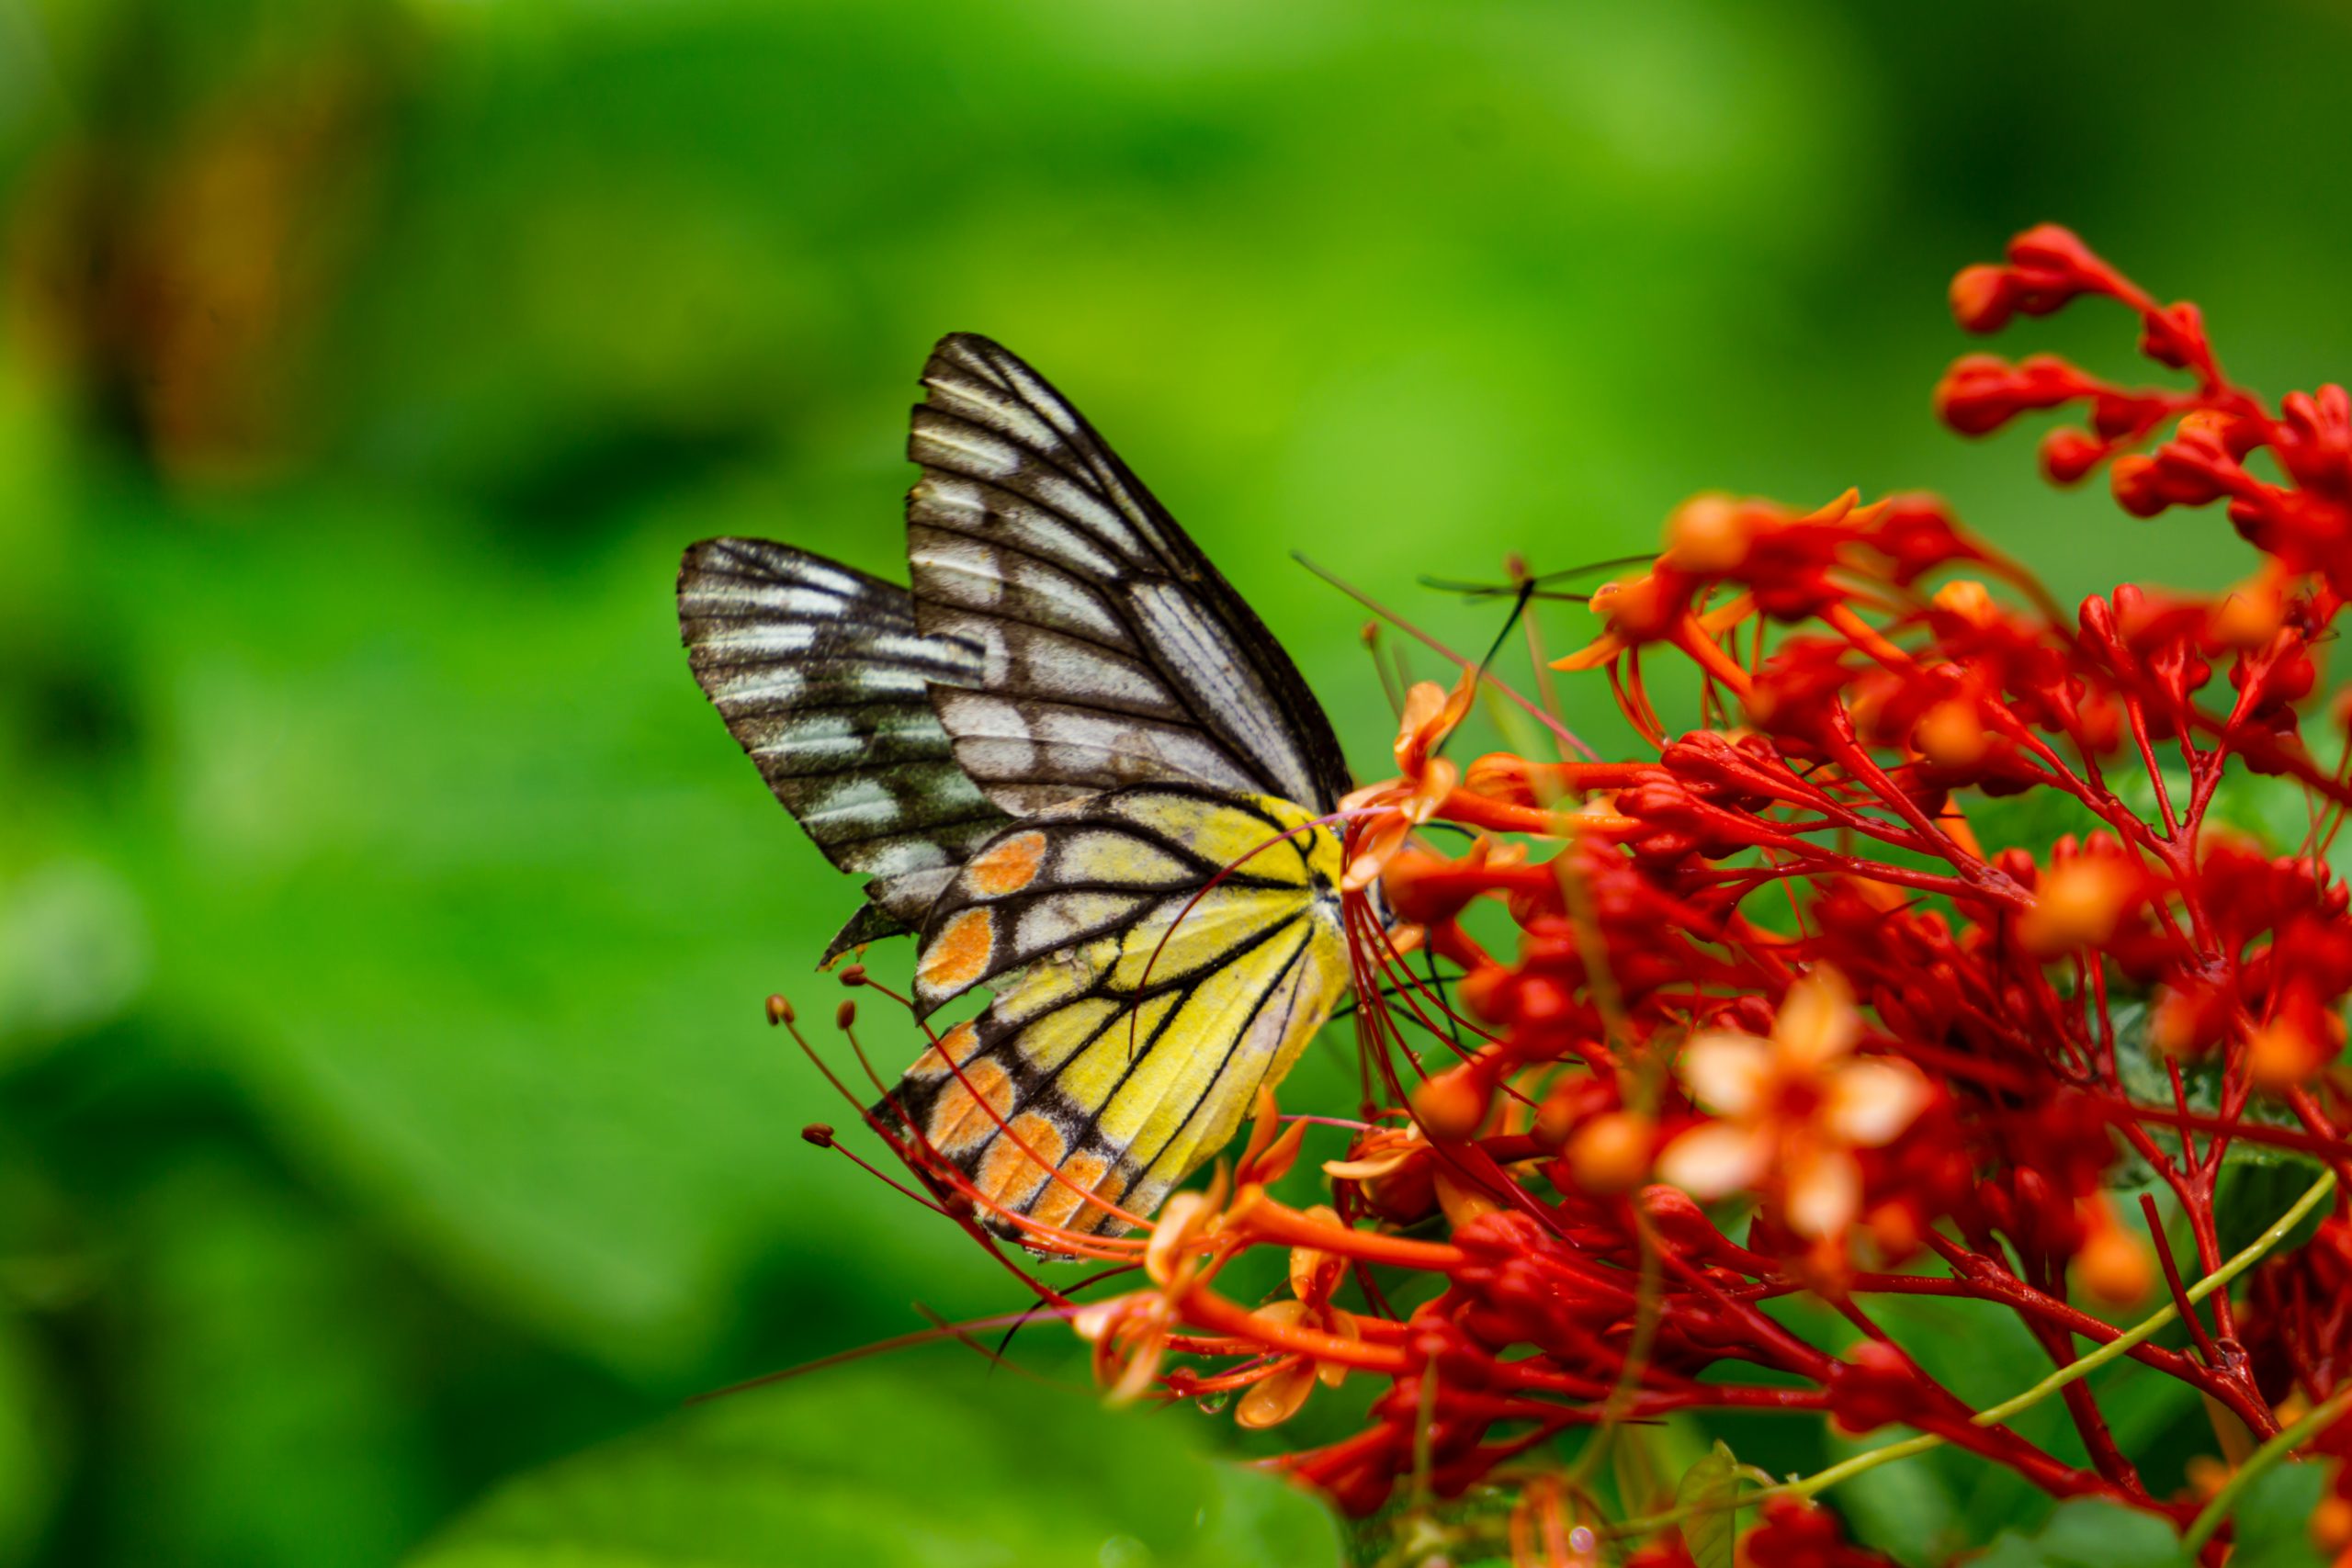 A butterfly on a flowering plant